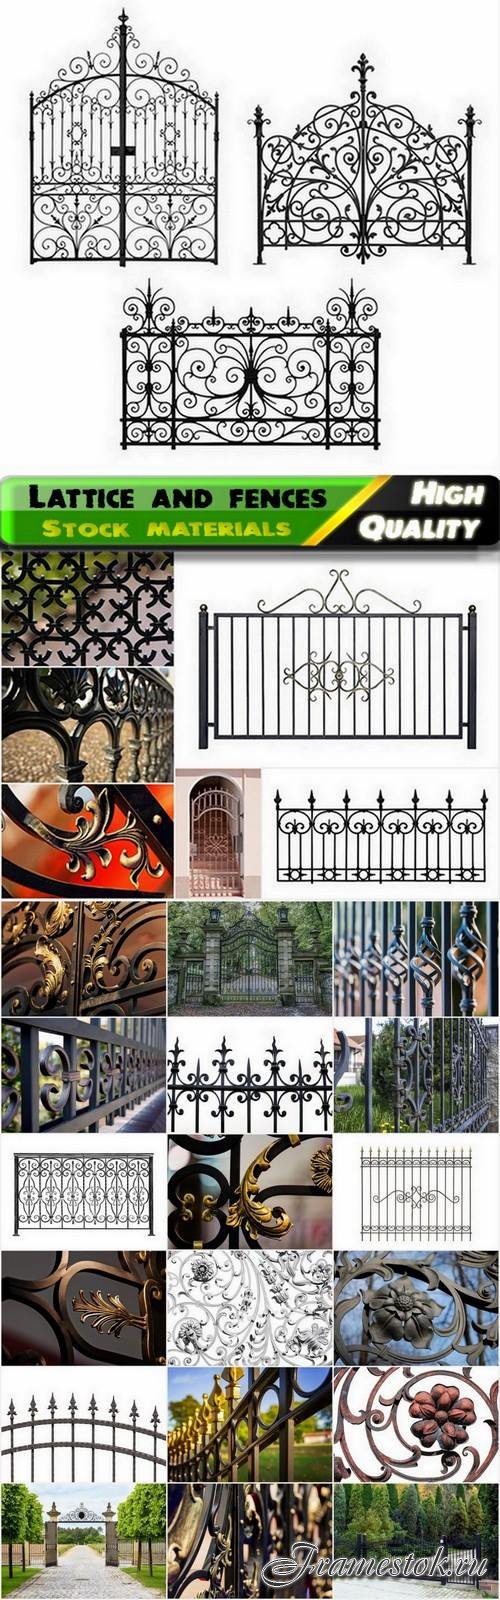 Decorative lattice and fences wrought of metal - 25 HQ Jpg